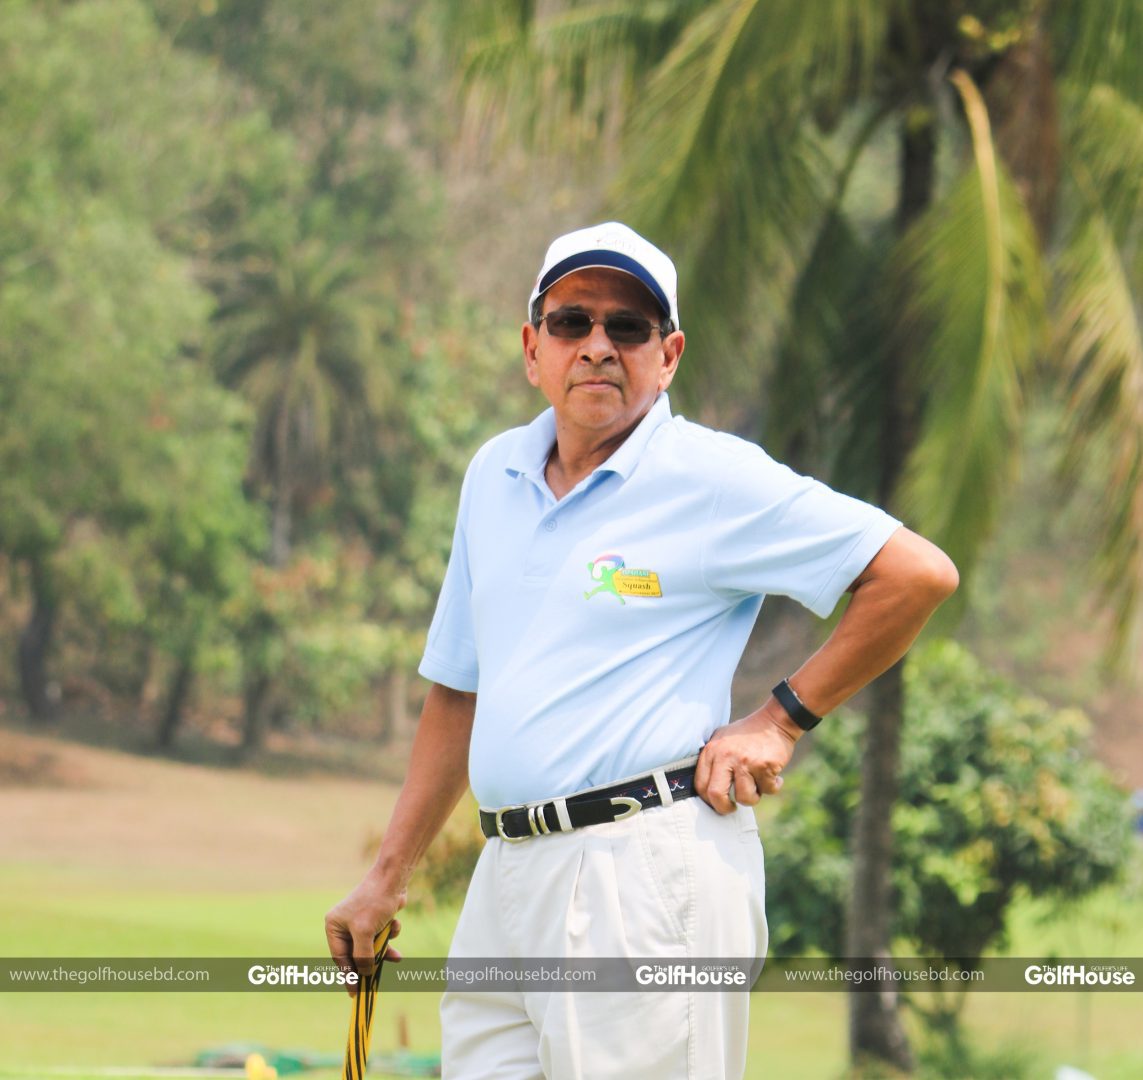 Meah_M_A_Rahim_is_the_Vice_President_of_Bhatiary_Golf_and_Country_Club_(BGCC)_in_Chittagong_Bangladesh.